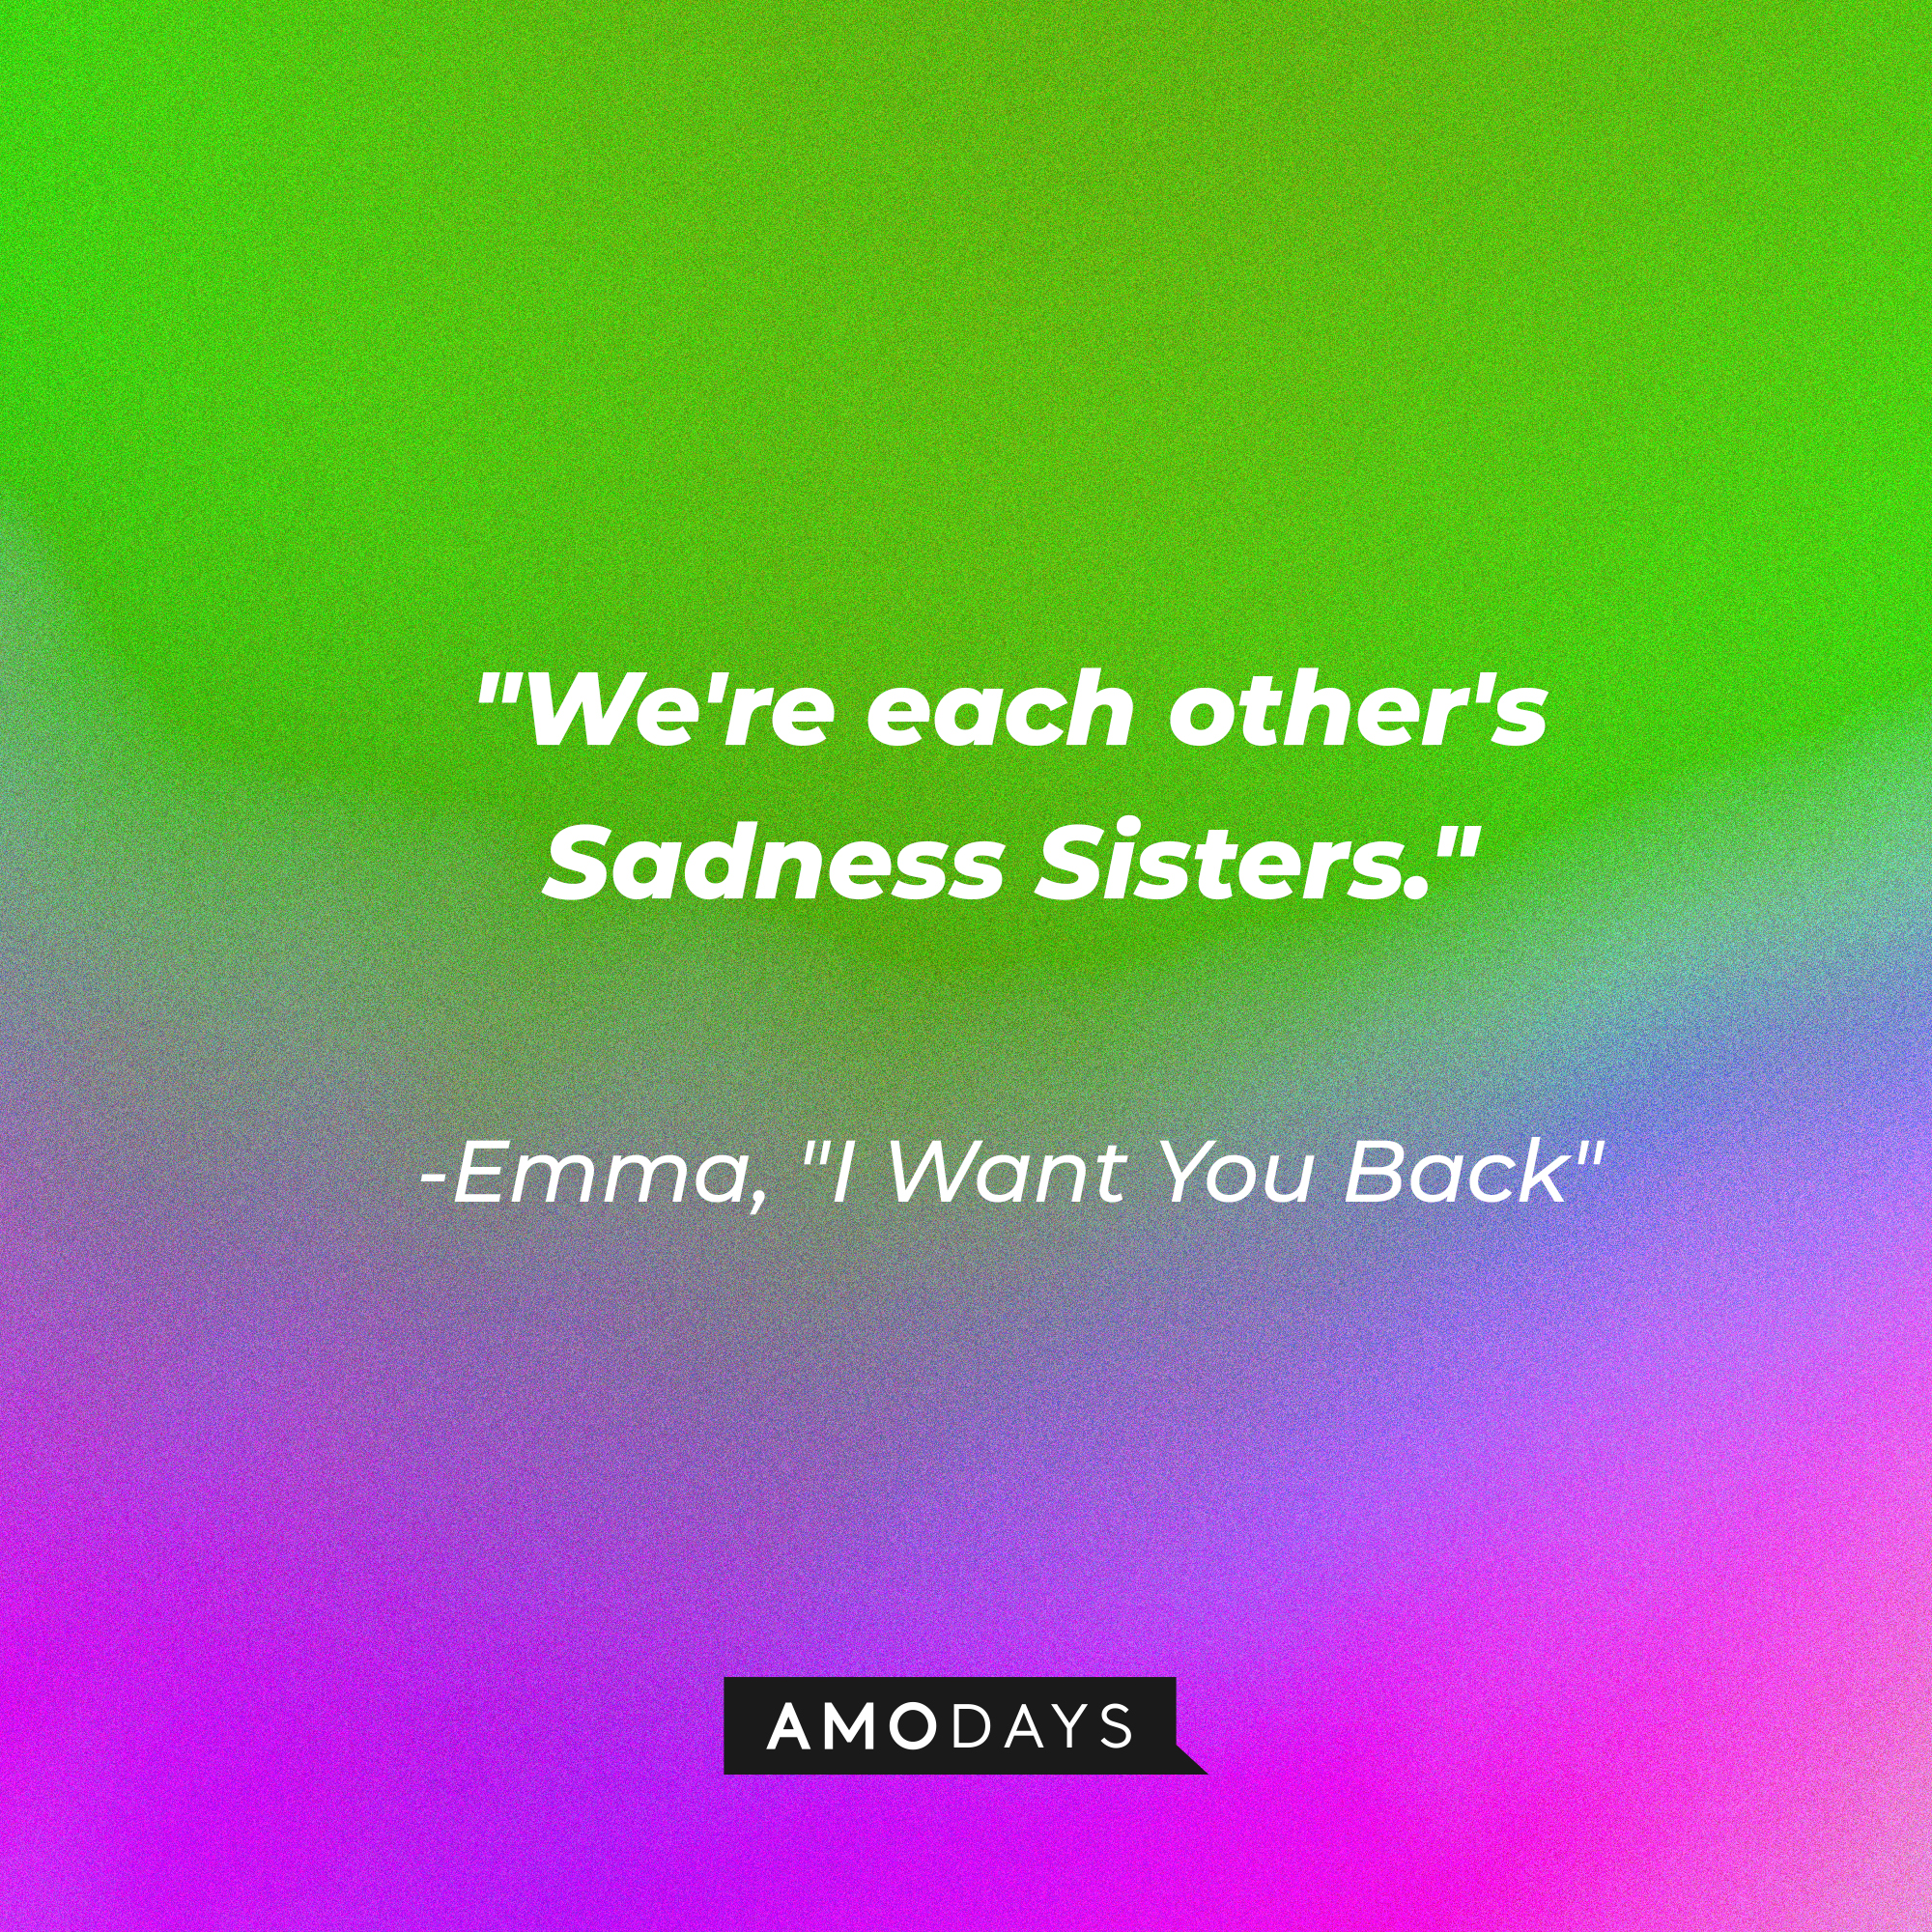 Emma's quote in "I Want You Back:" "We're each other's Sadness Sisters." | Source: AmoDays